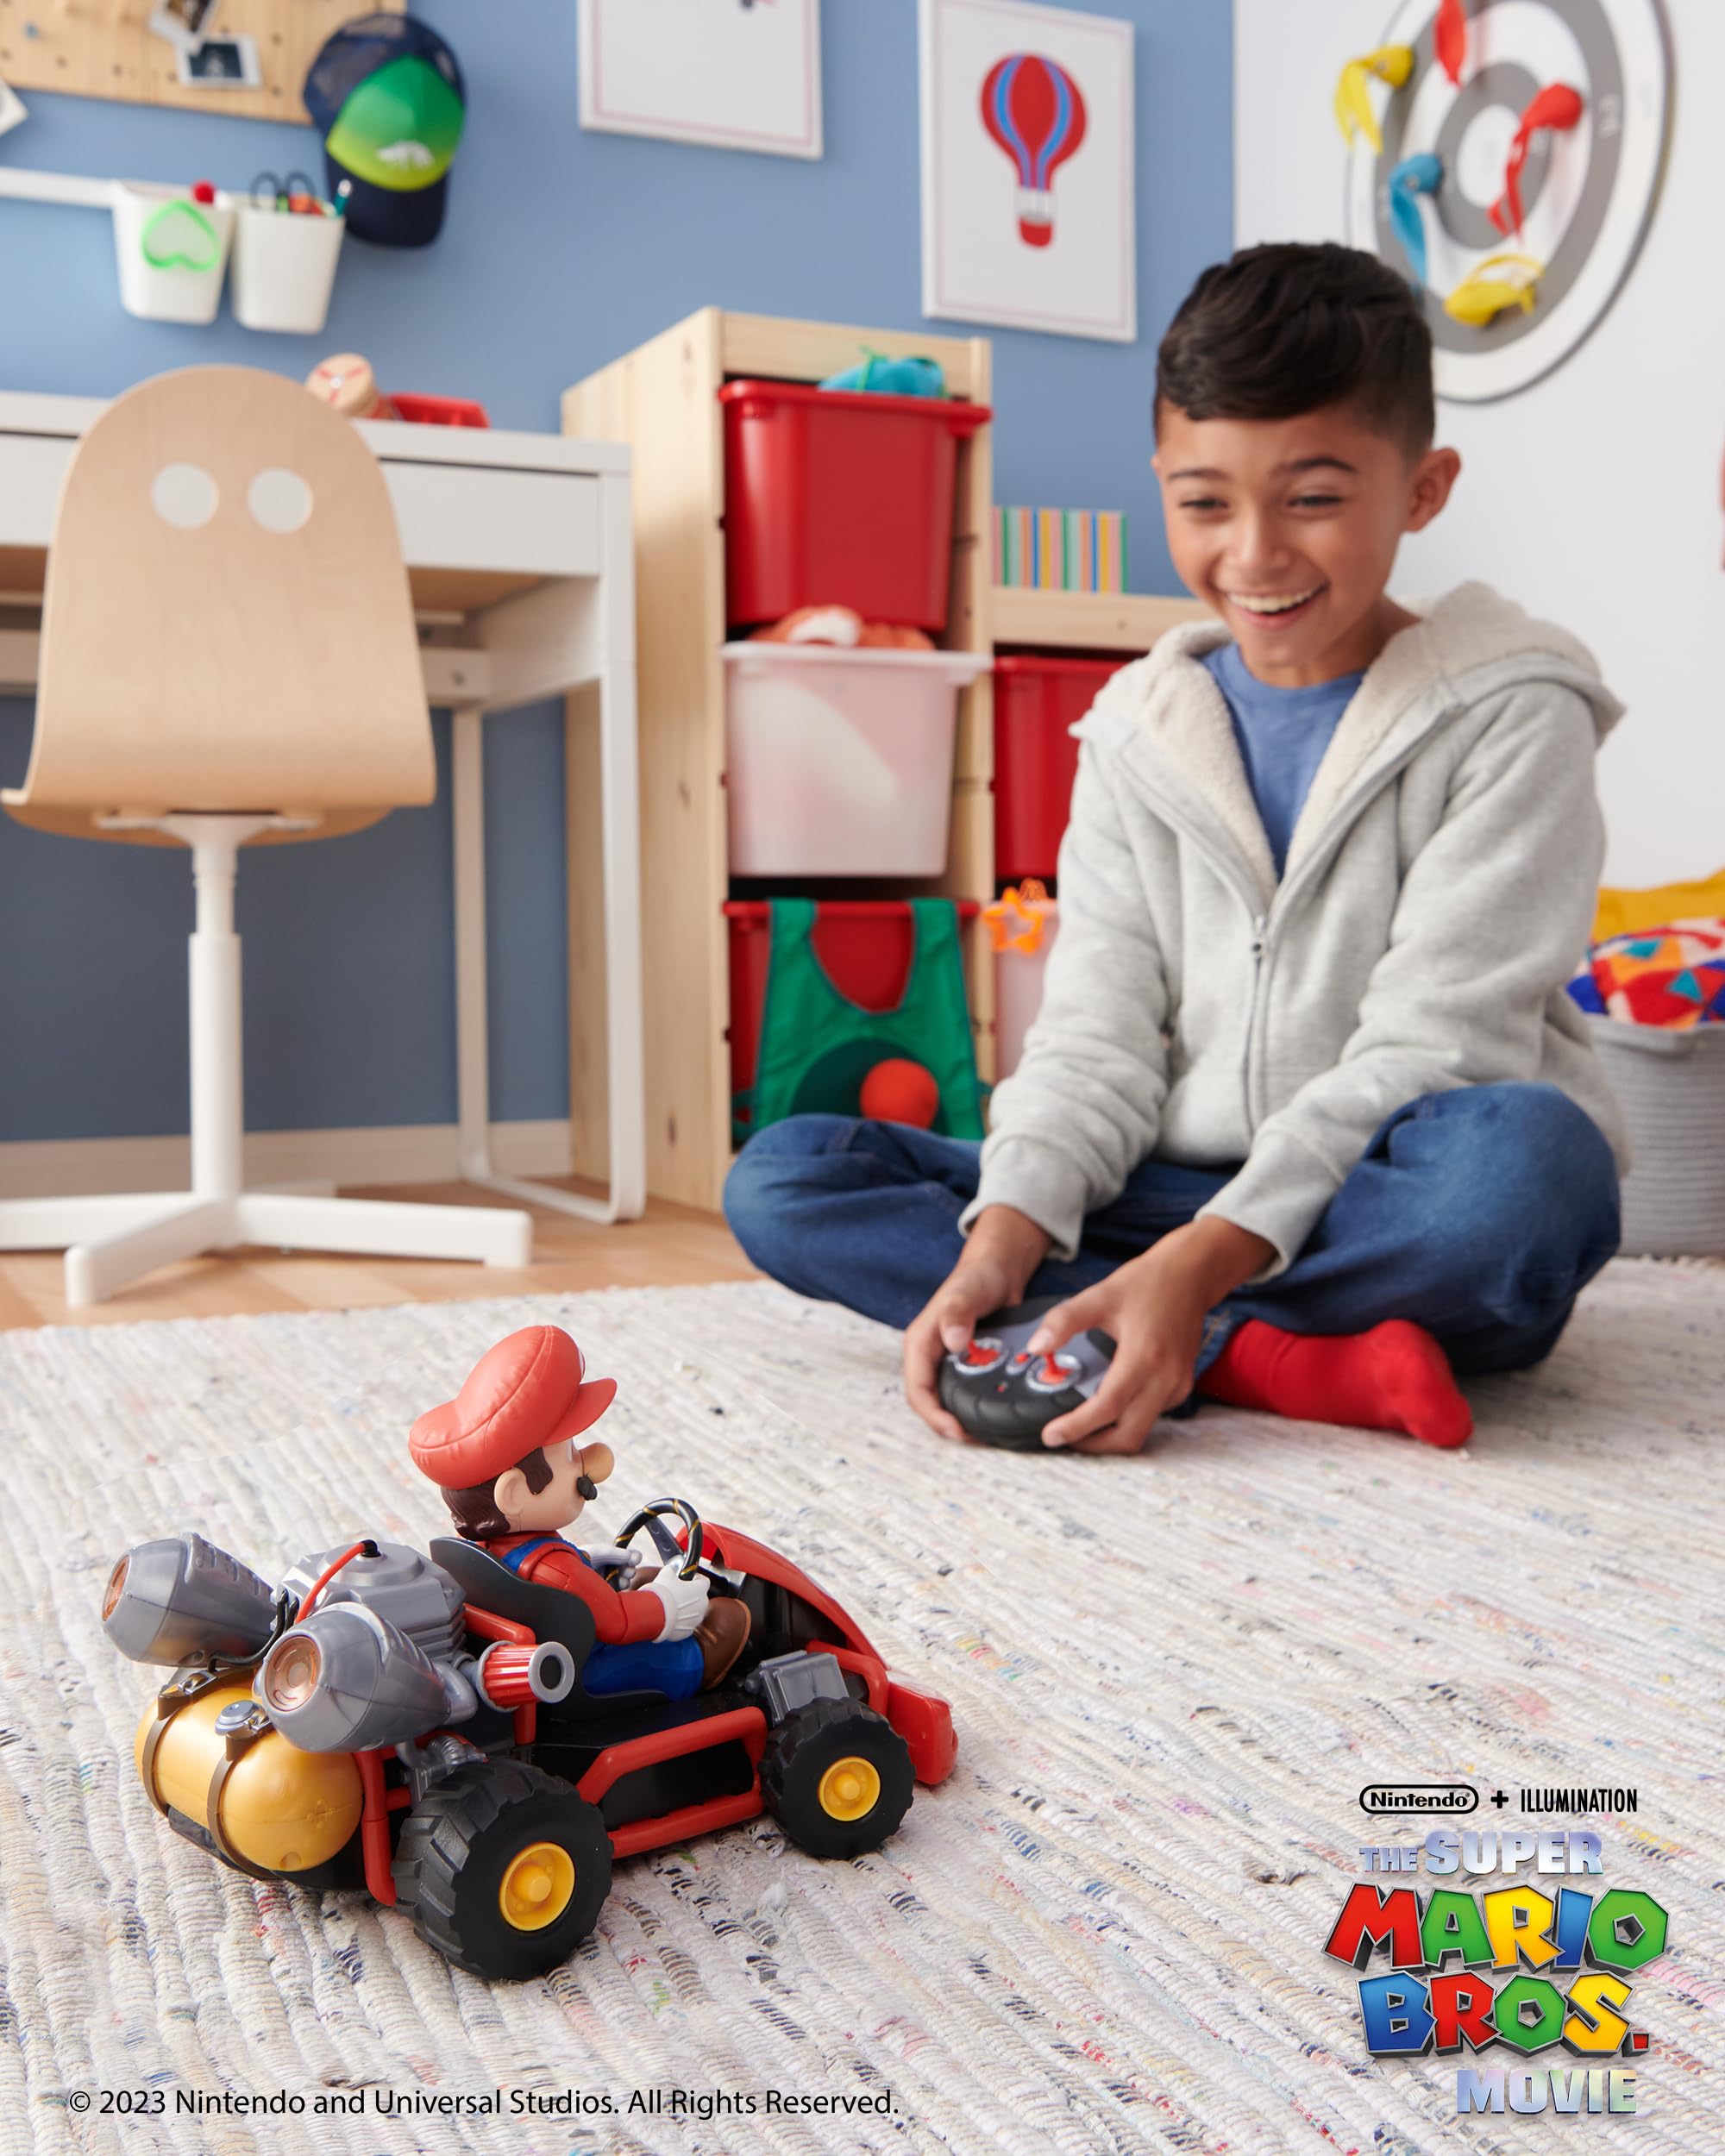 Nintendo Mario Rumble Kart RC Racer 2.4Ghz, with full function steering create 360 spins, whiles and drift! - Up to 100 ft. Range - For Kids ages 4+